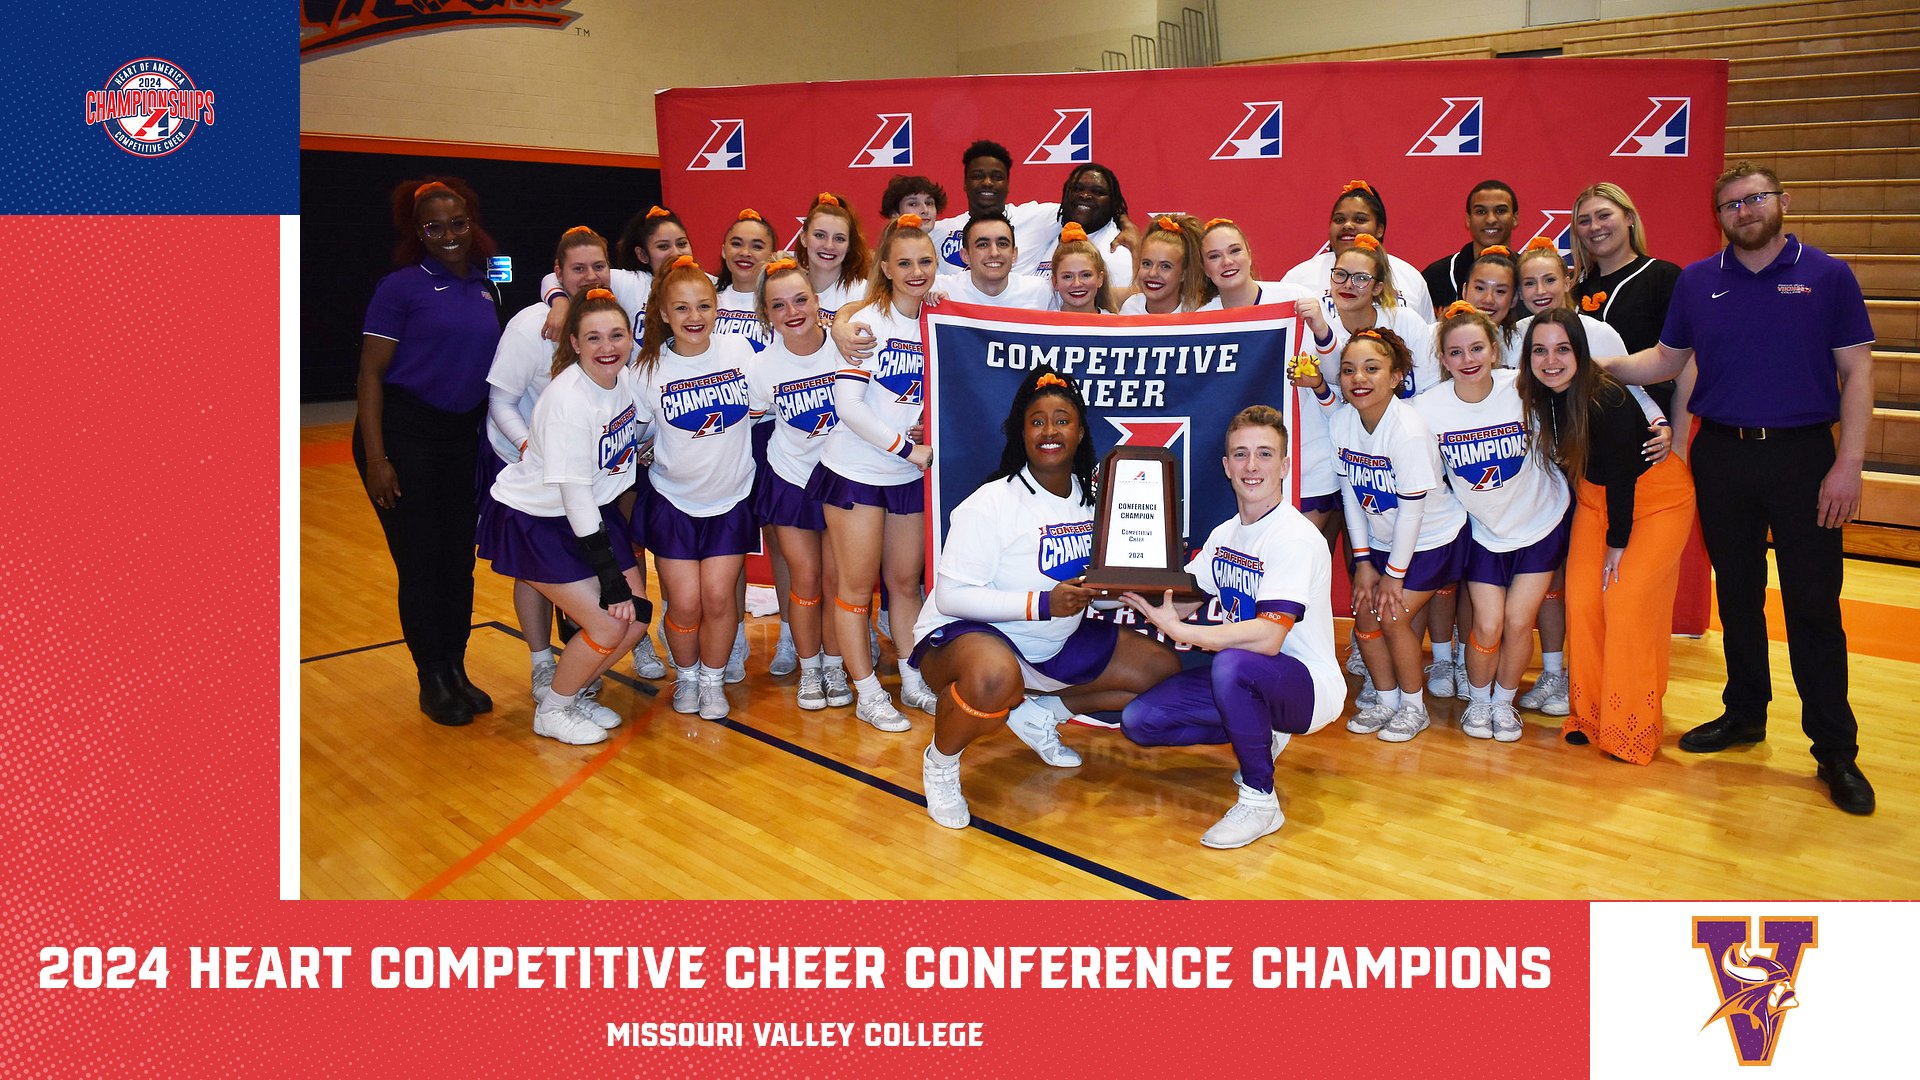 Missouri Valley College Wins Impressive 8th-Straight Heart Competitive Cheer Conference Championship